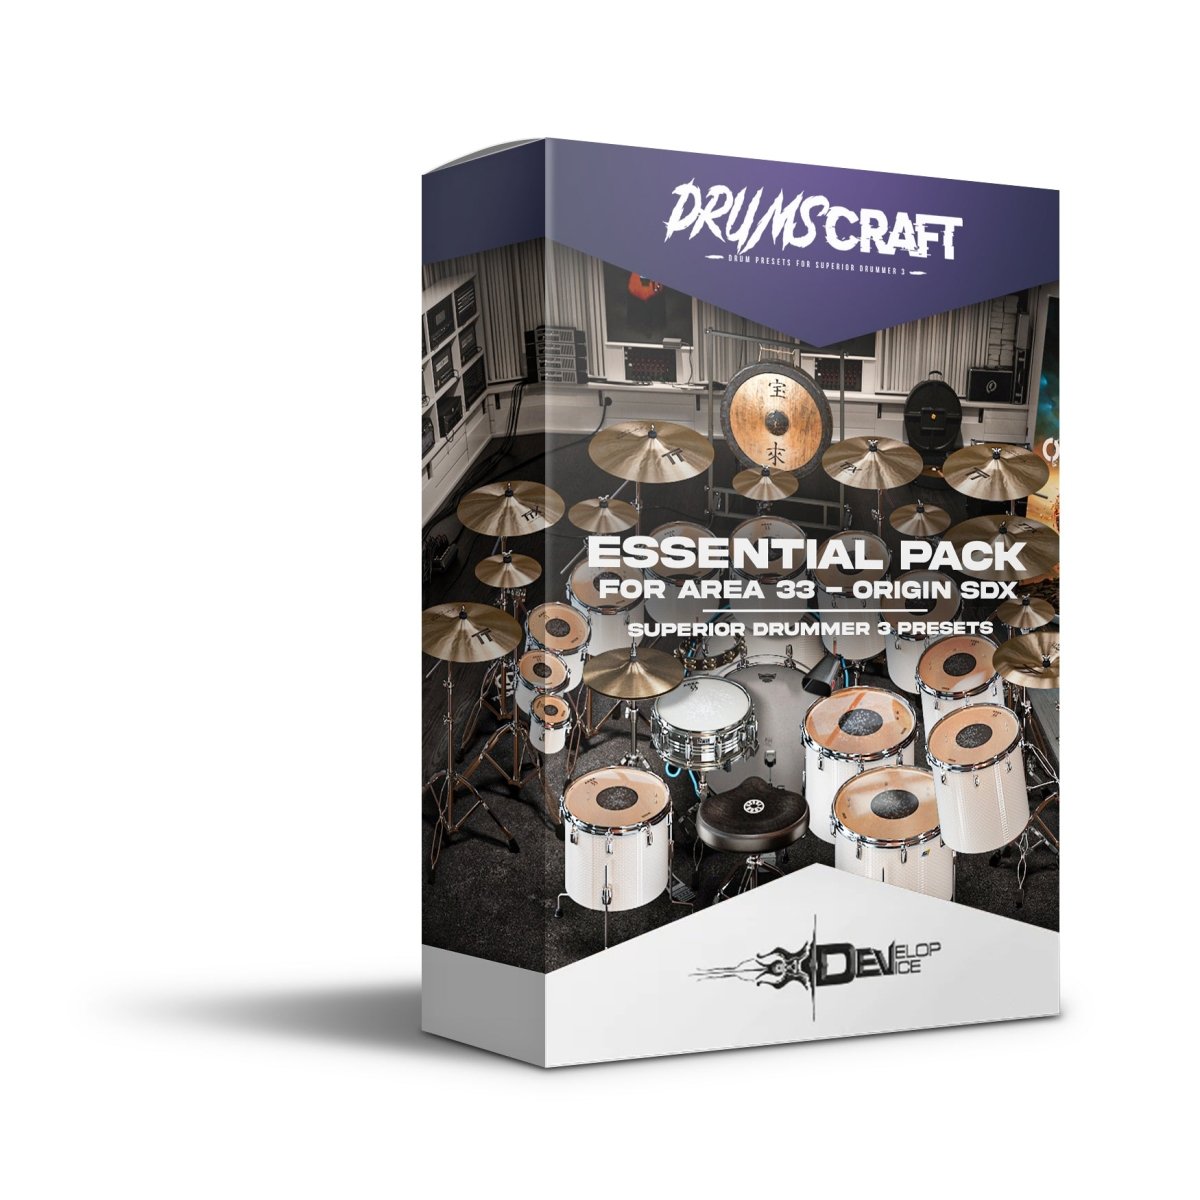 Essential Pack for Area 33 - Origin SDX - Superior Drummer 3 Presets by Develop Device